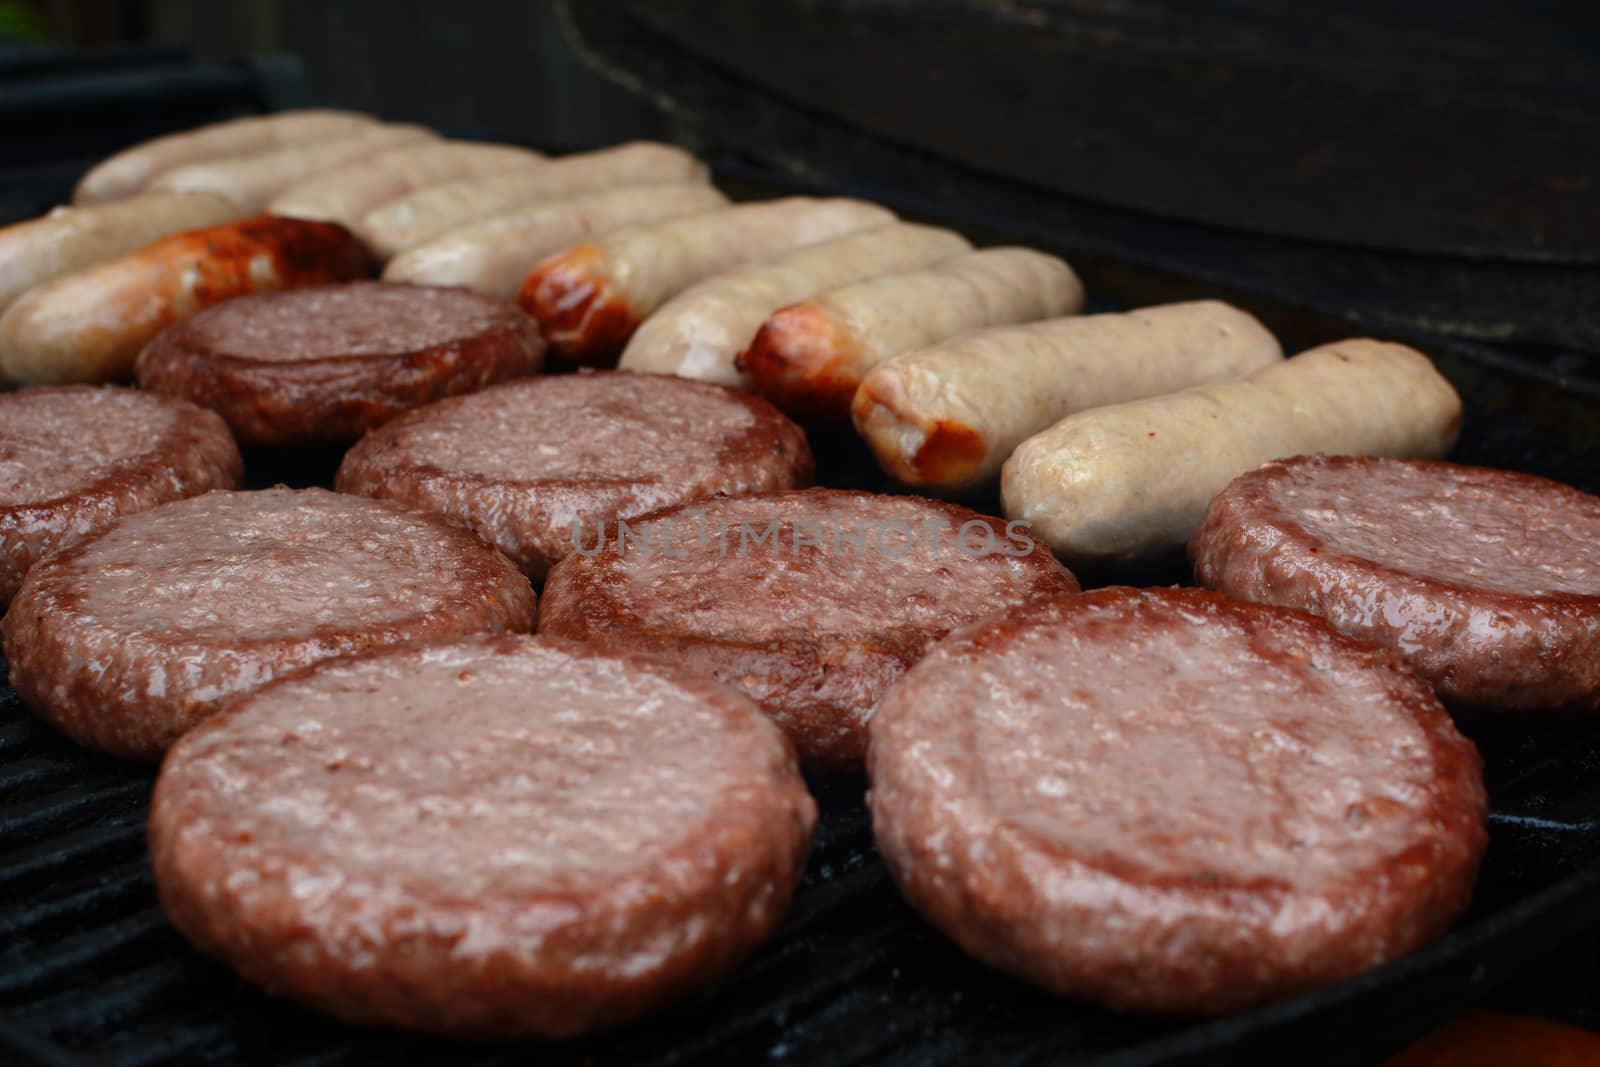 Rows of burgers and sausages starting to cook and brown on a barbecue grill